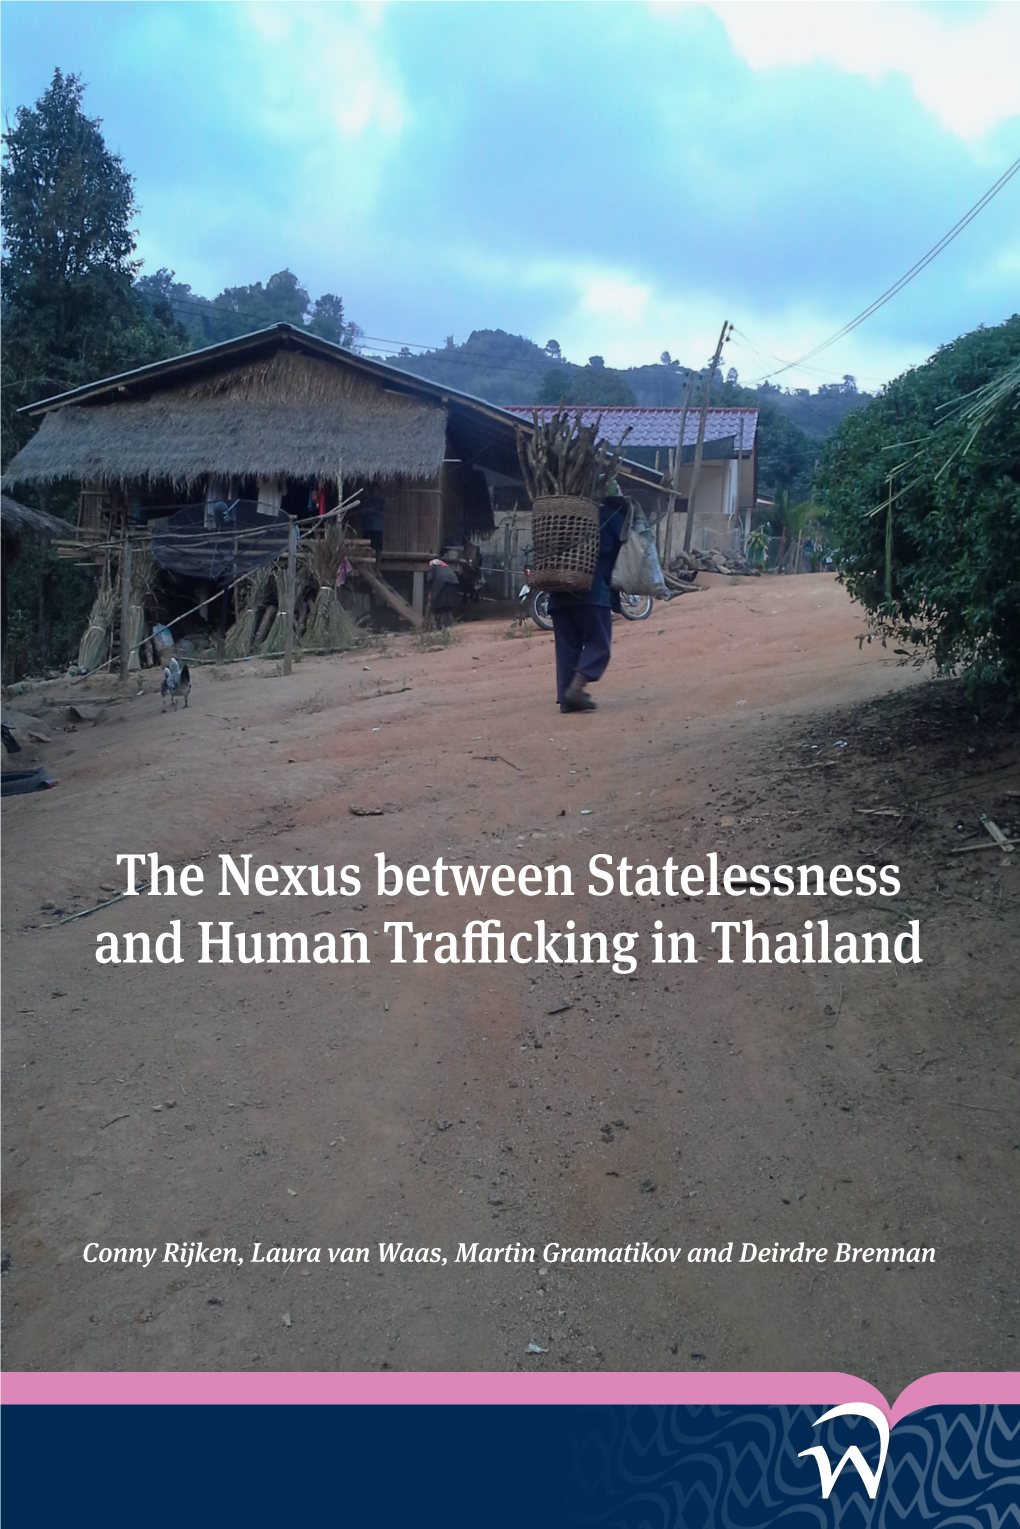 The Nexus Between Statelessness and Human Trafficking in Thailand